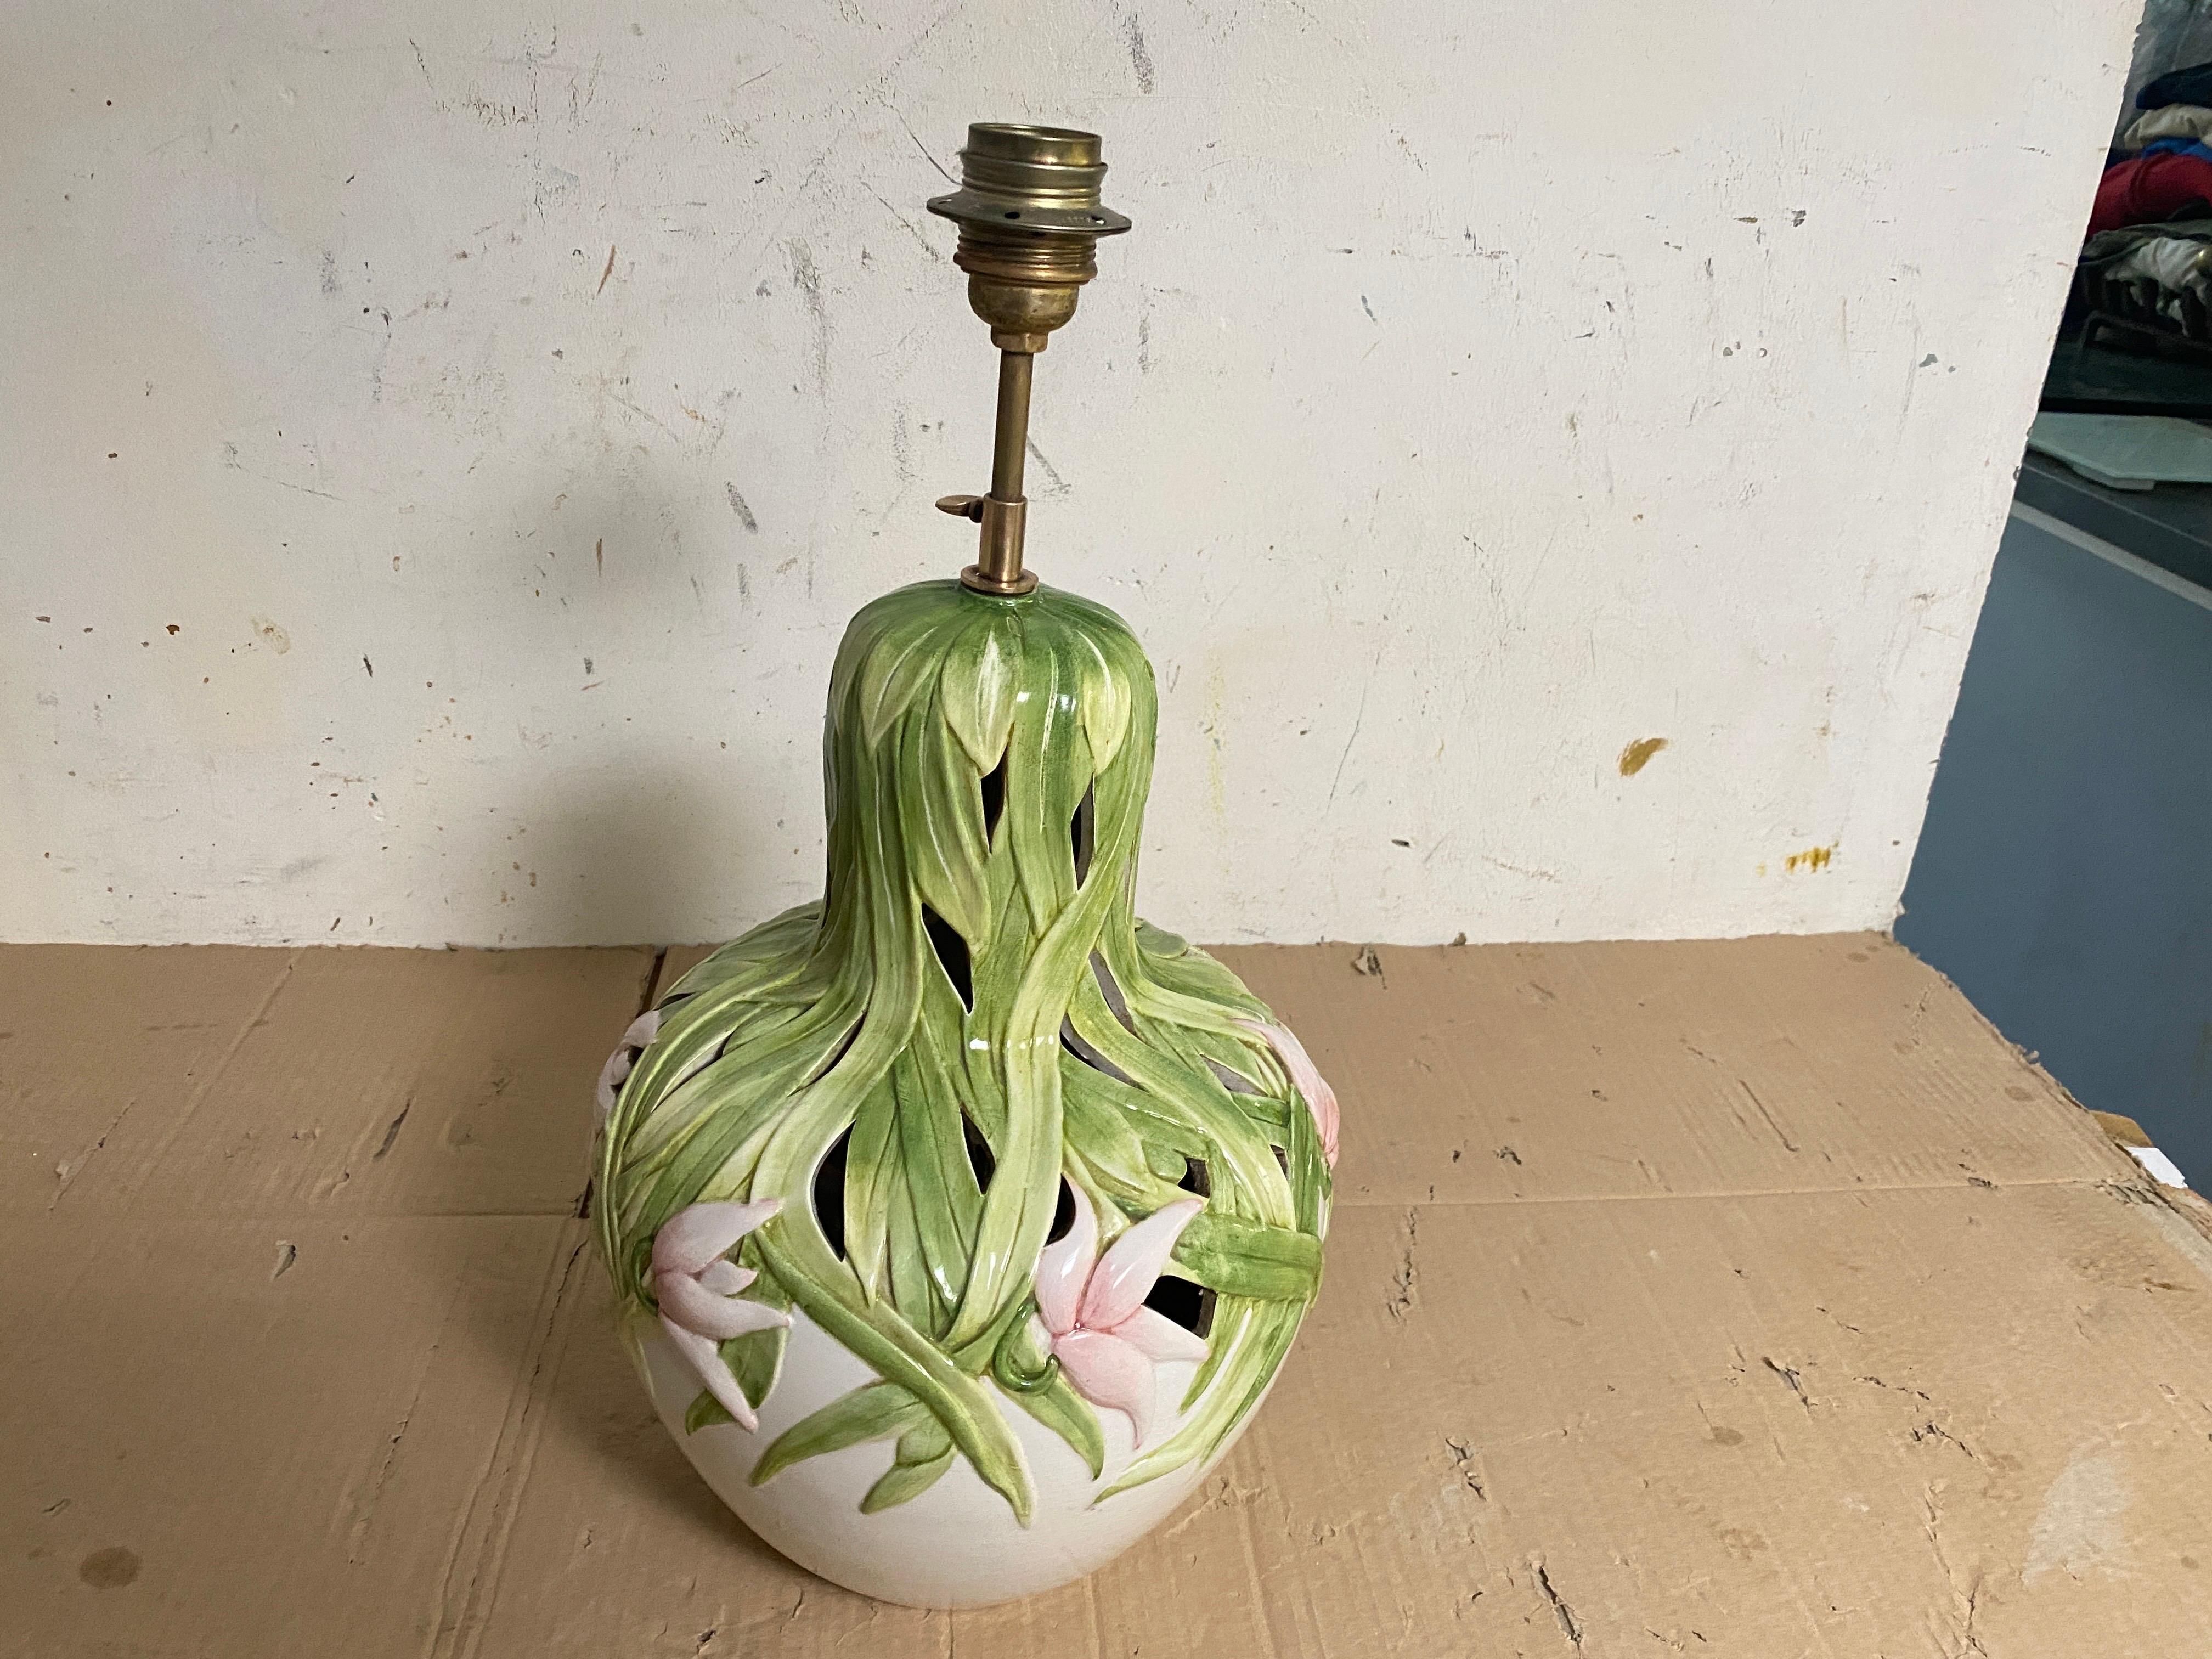 Table Lamp in Crakled Enemeled Ceramic Green Pink and White colors, France, 1970 For Sale 11